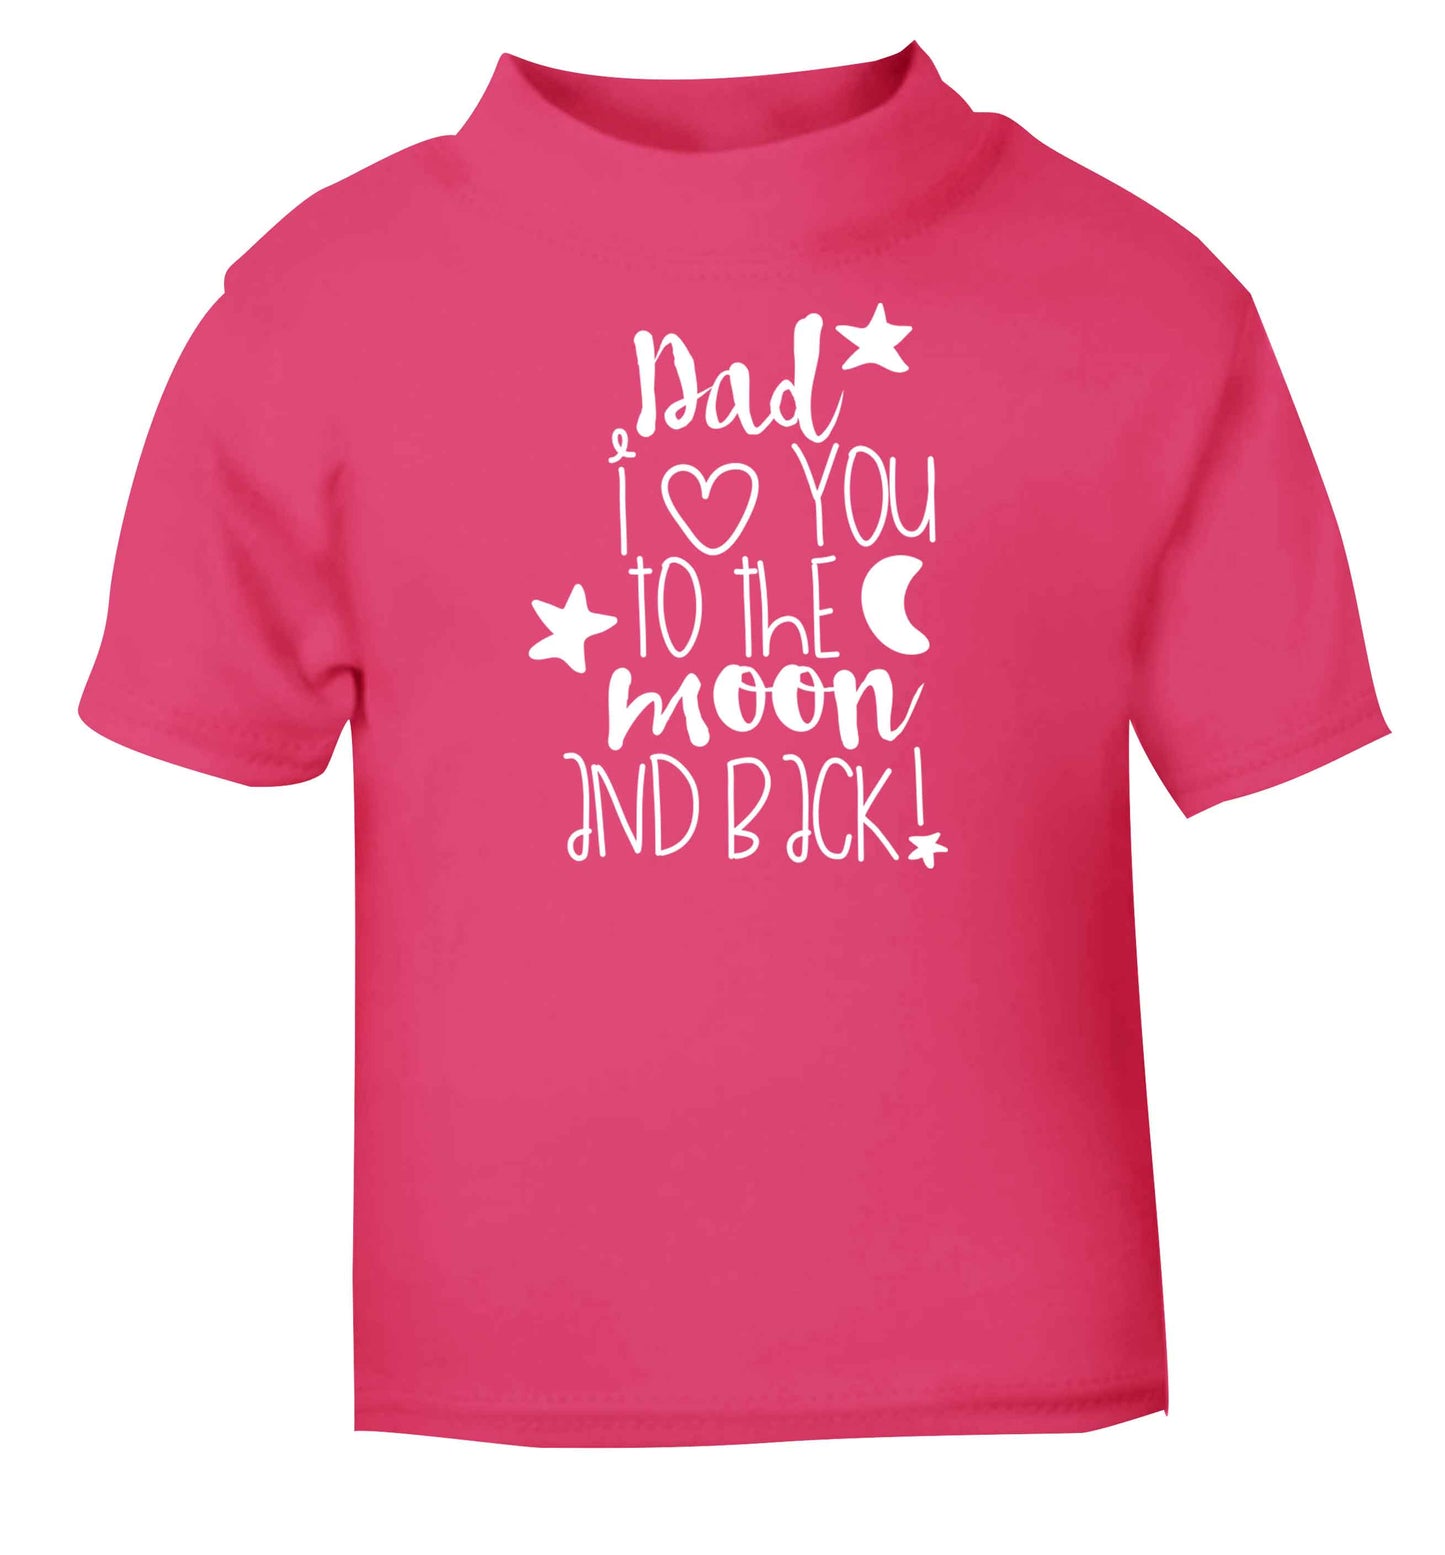 Dad I love you to the moon and back pink baby toddler Tshirt 2 Years